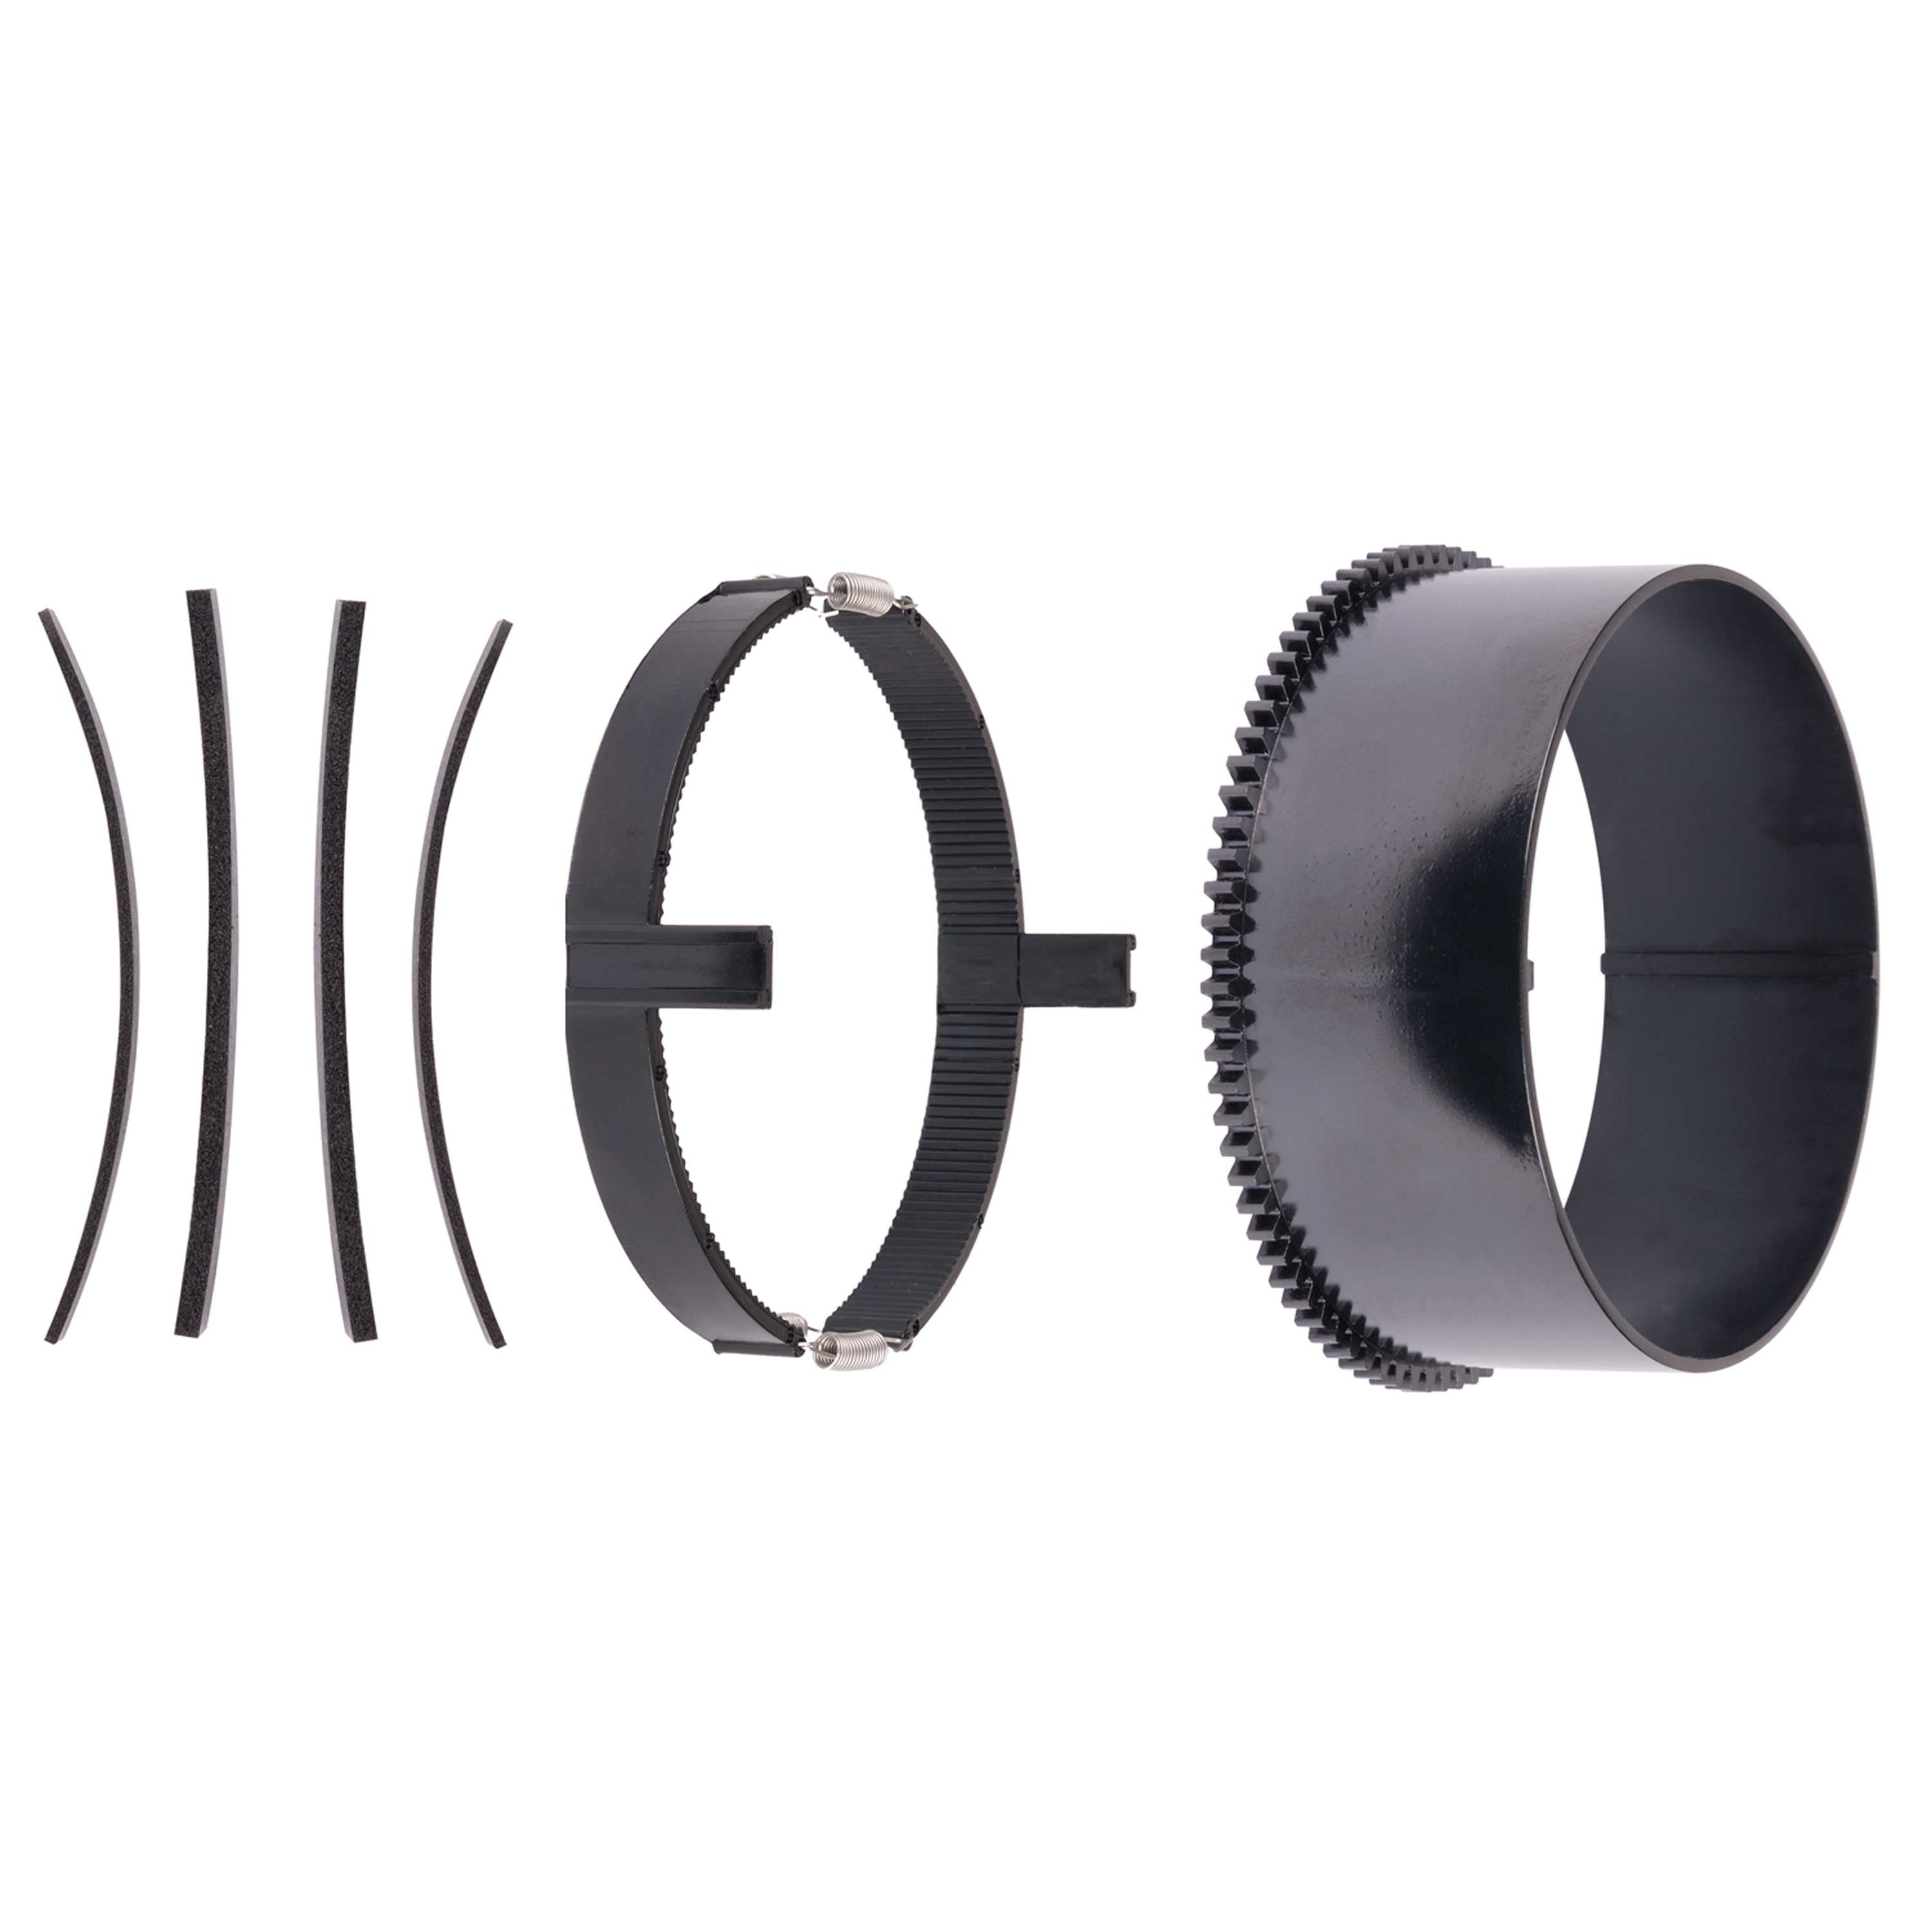 Universal Zoom Gear for Lenses up to 3.0-inch Diameter